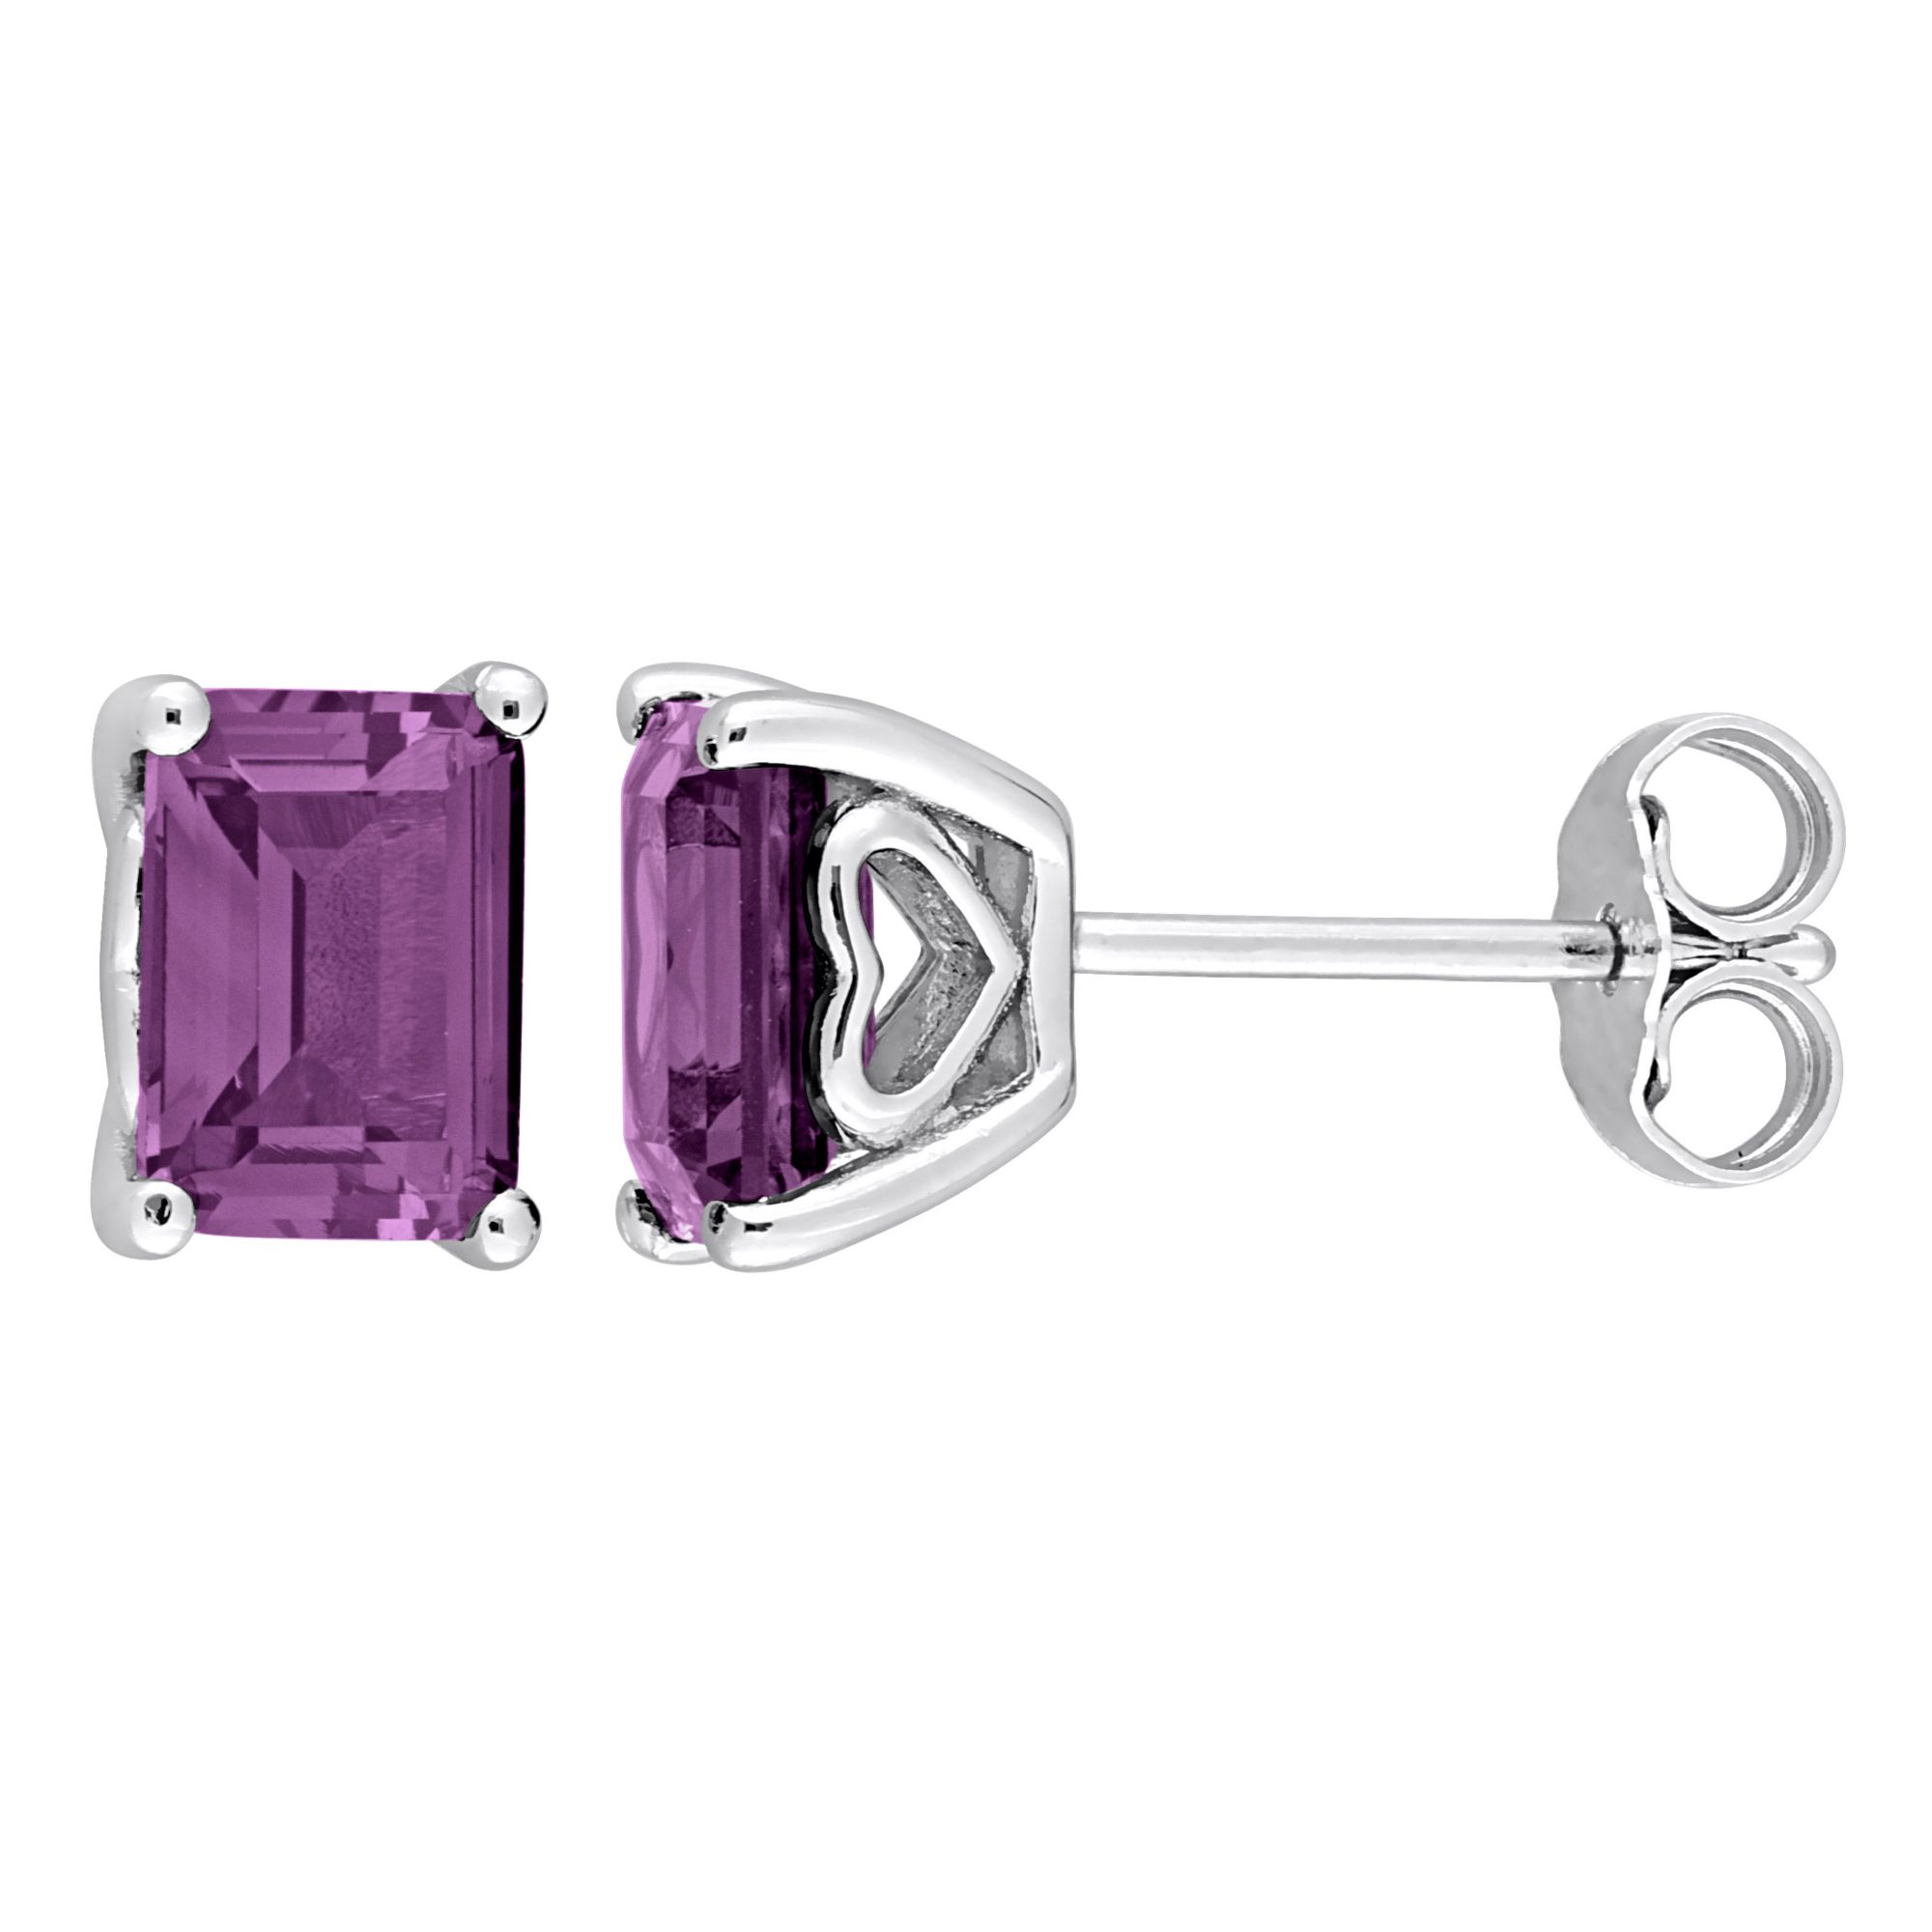 3 ct. t.g.w. Octagon Simulated Alexandrite Stud Earrings in Sterling Silver